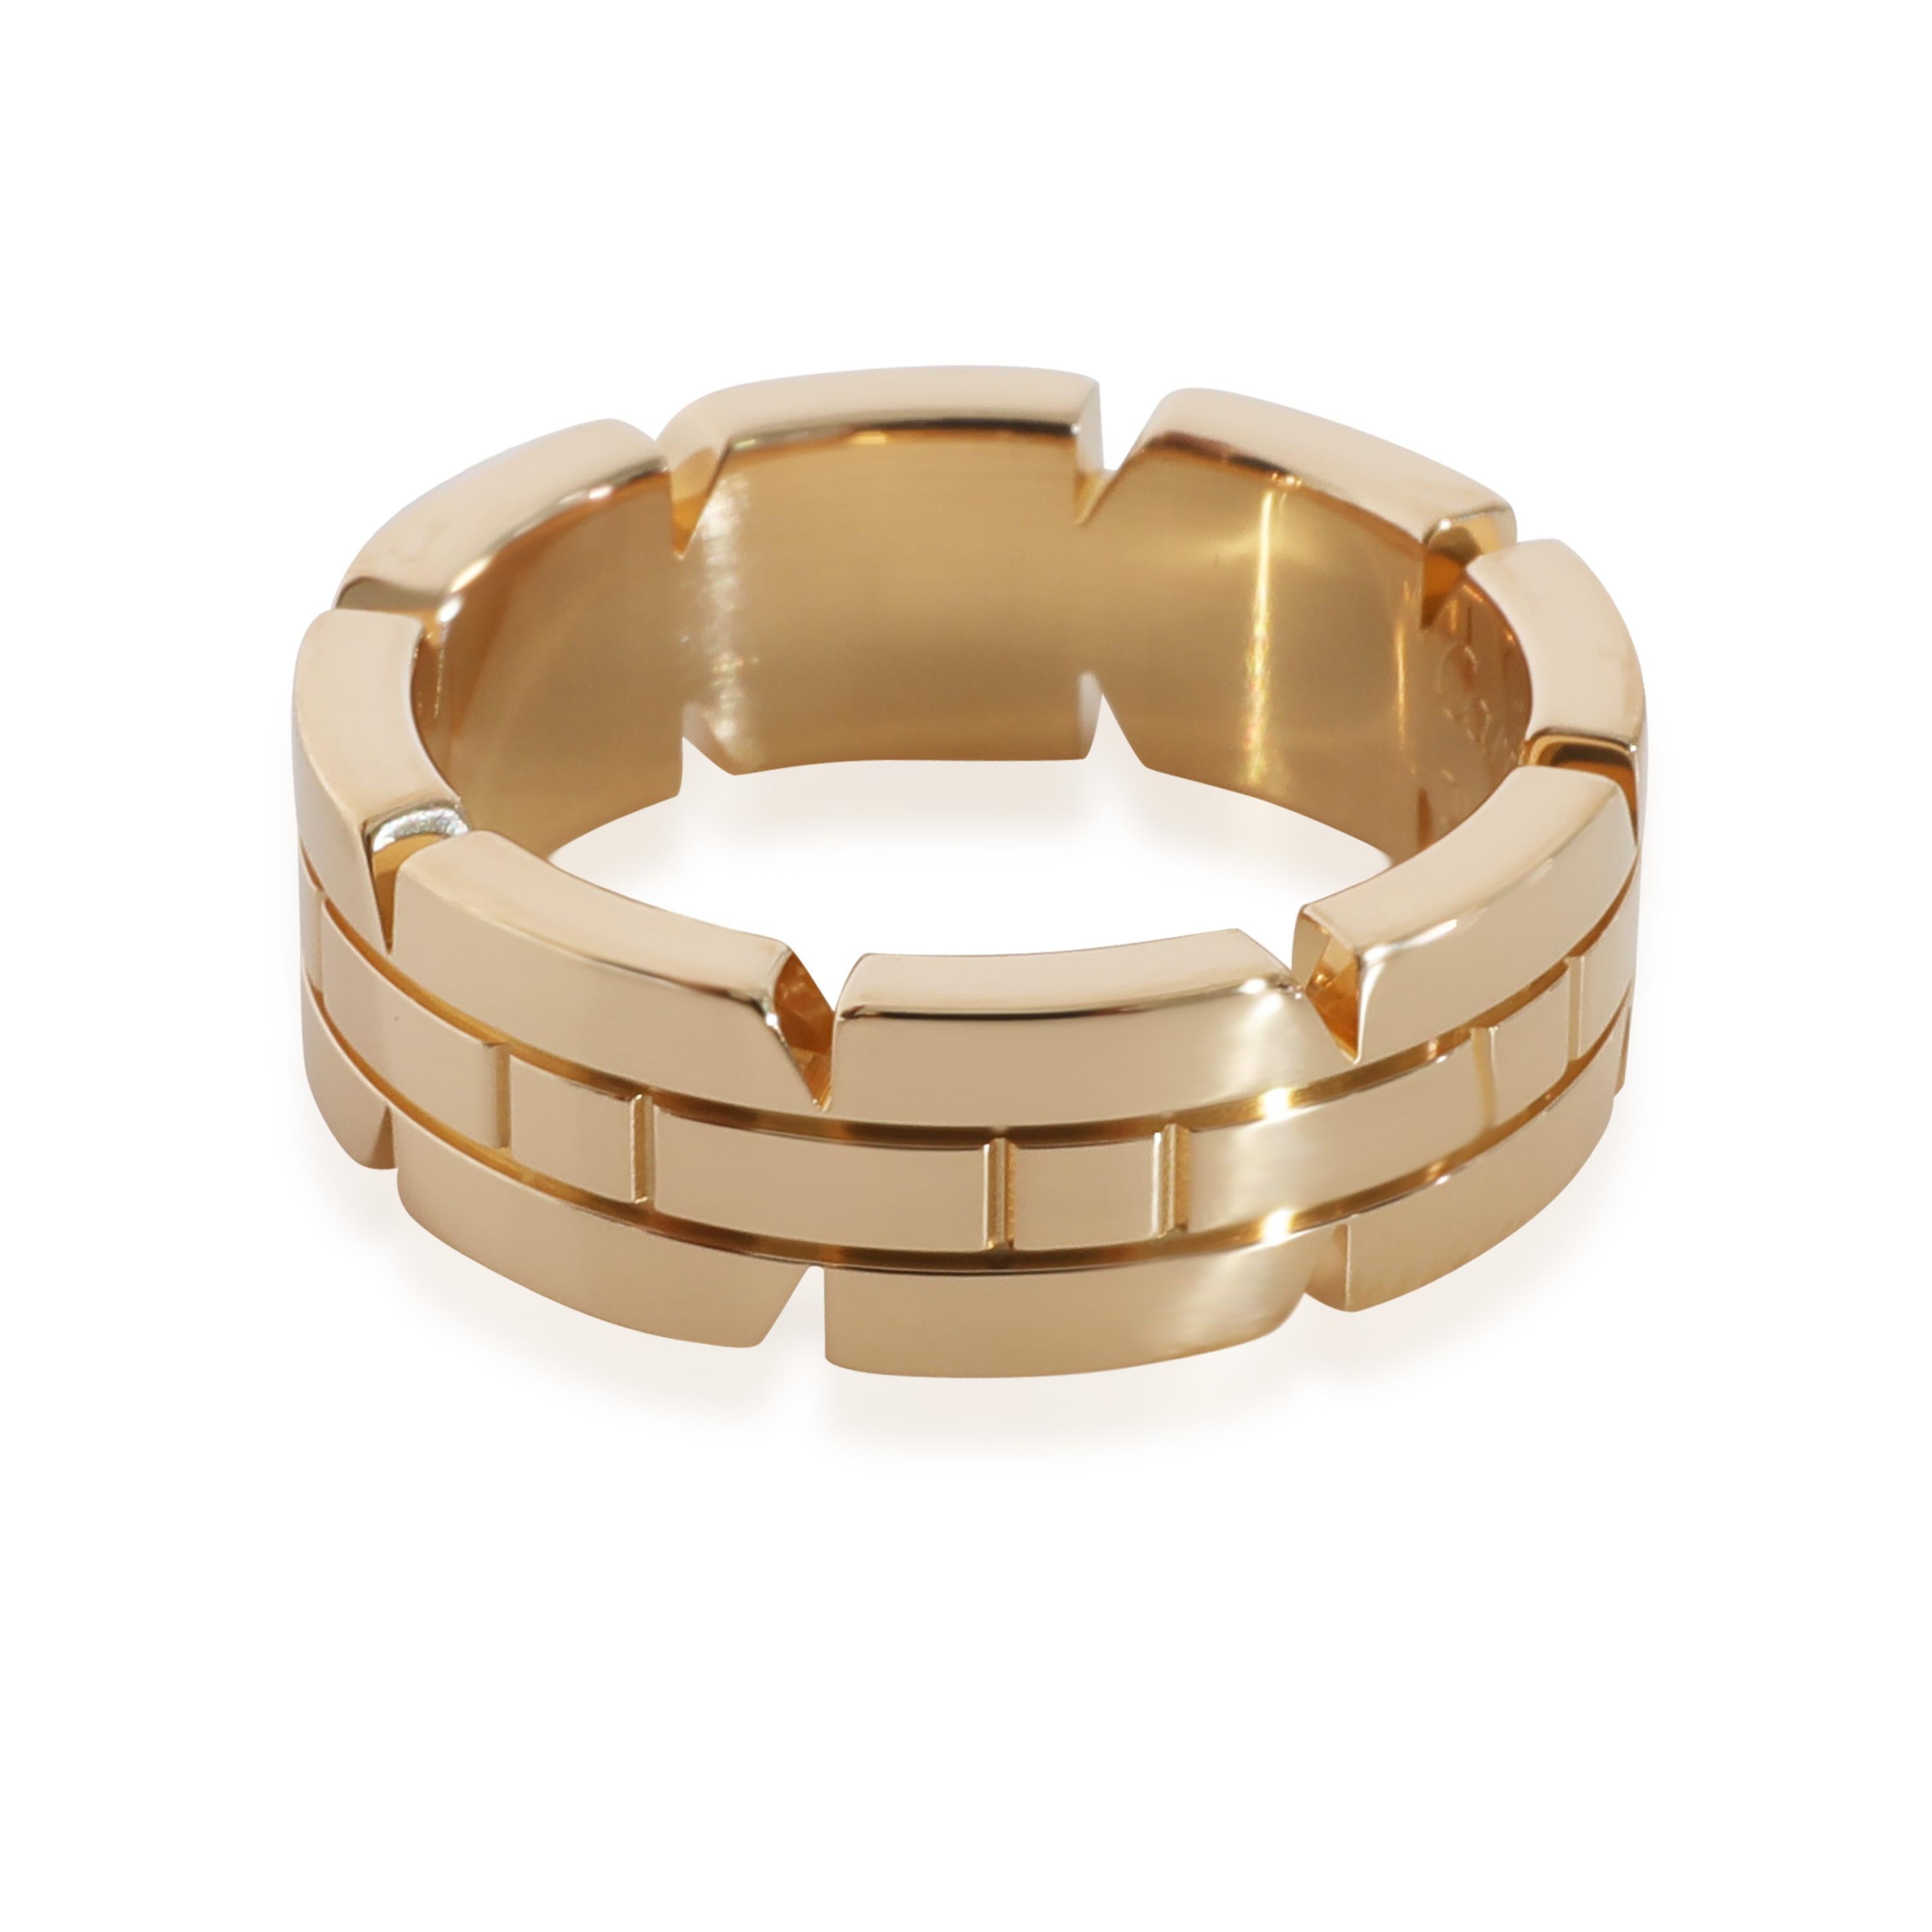 Cartier Maillon Panthere  Ring in 18k Yellow Gold

PRIMARY DETAILS
SKU: 129149
Listing Title: Cartier Maillon Panthere  Ring in 18k Yellow Gold
Condition Description: The Panthère de Cartier collection pays tribute to the natural world.